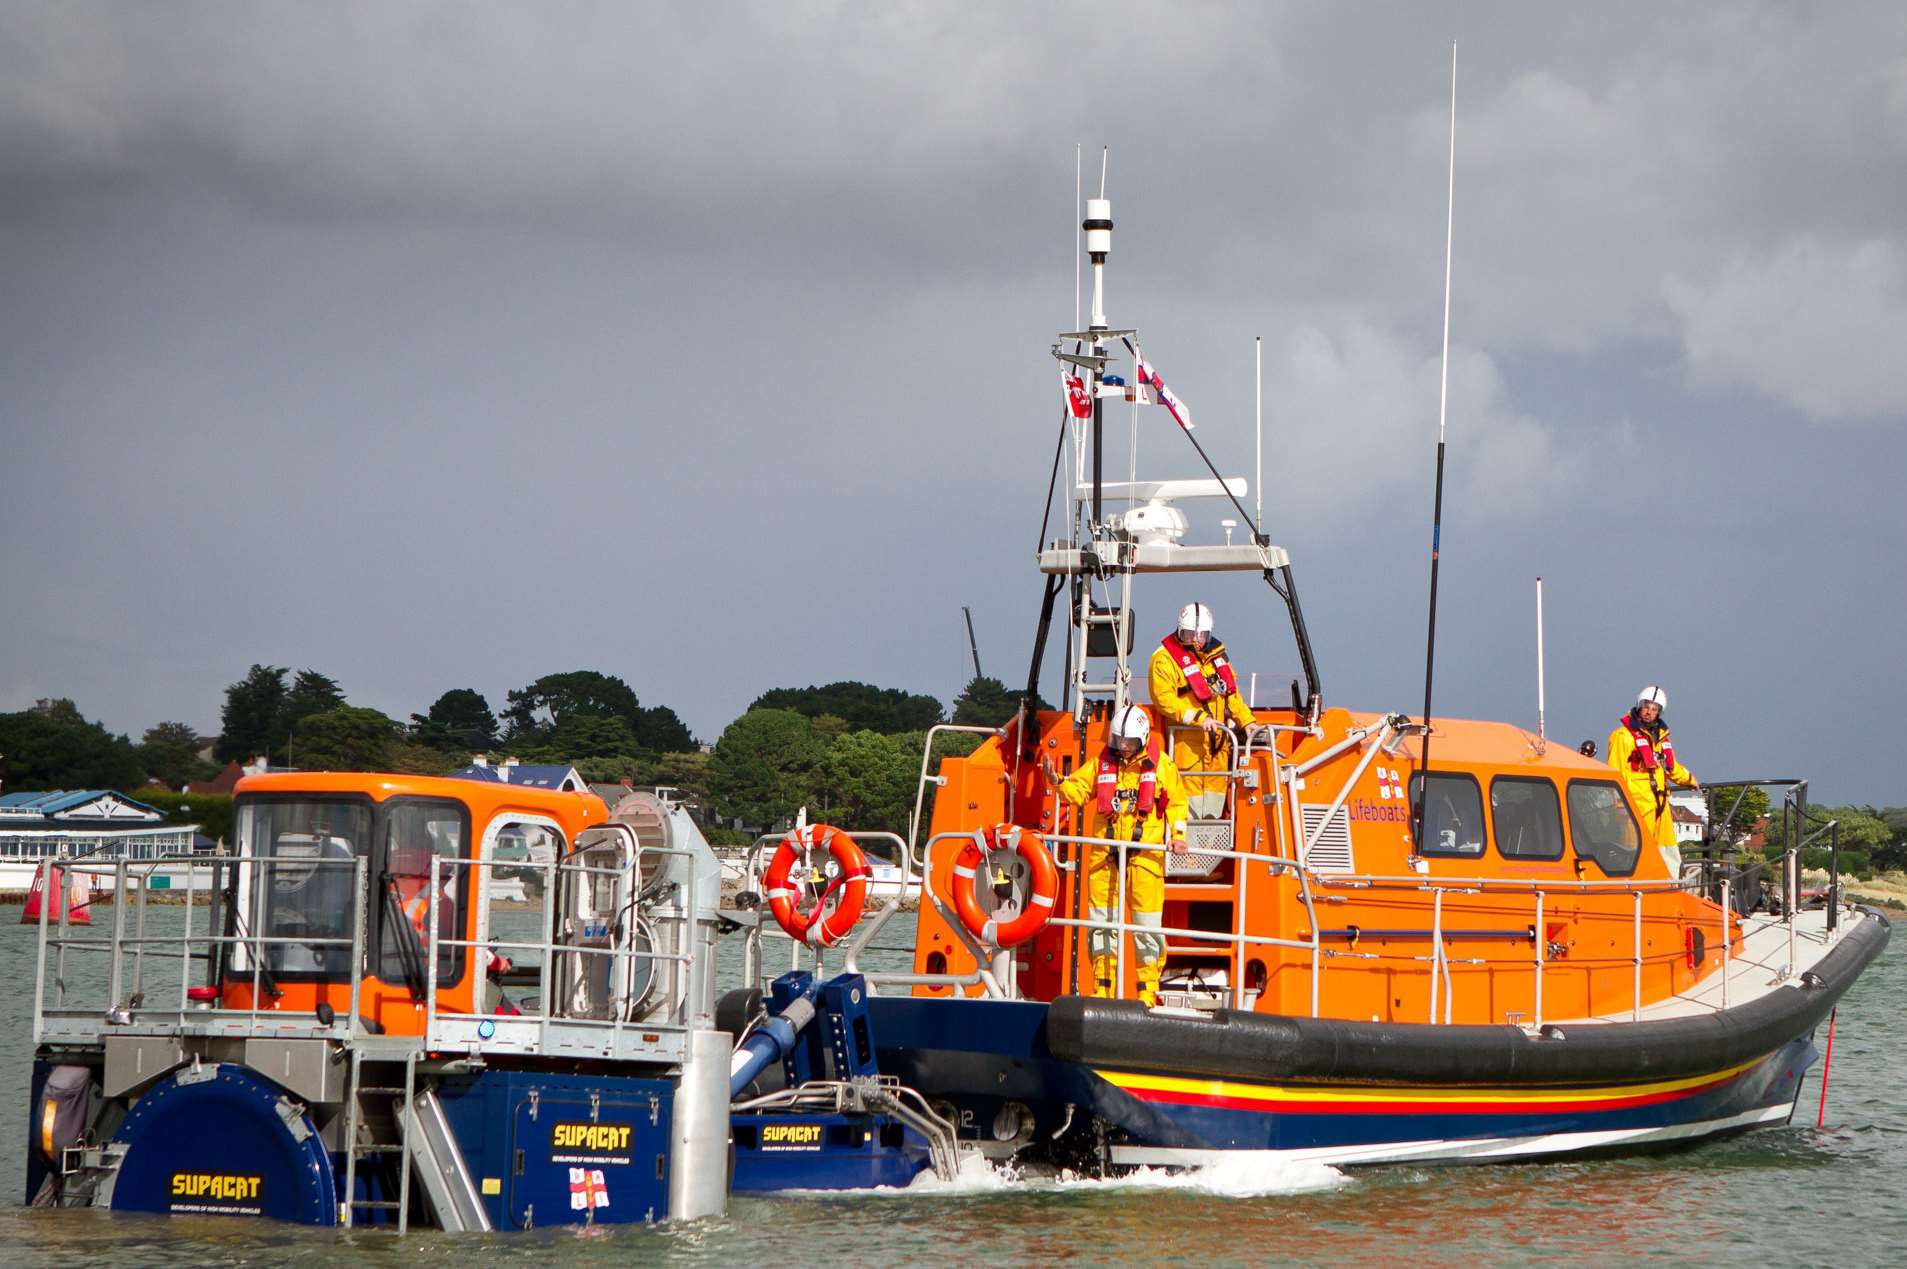 A Shannon class lifeboat